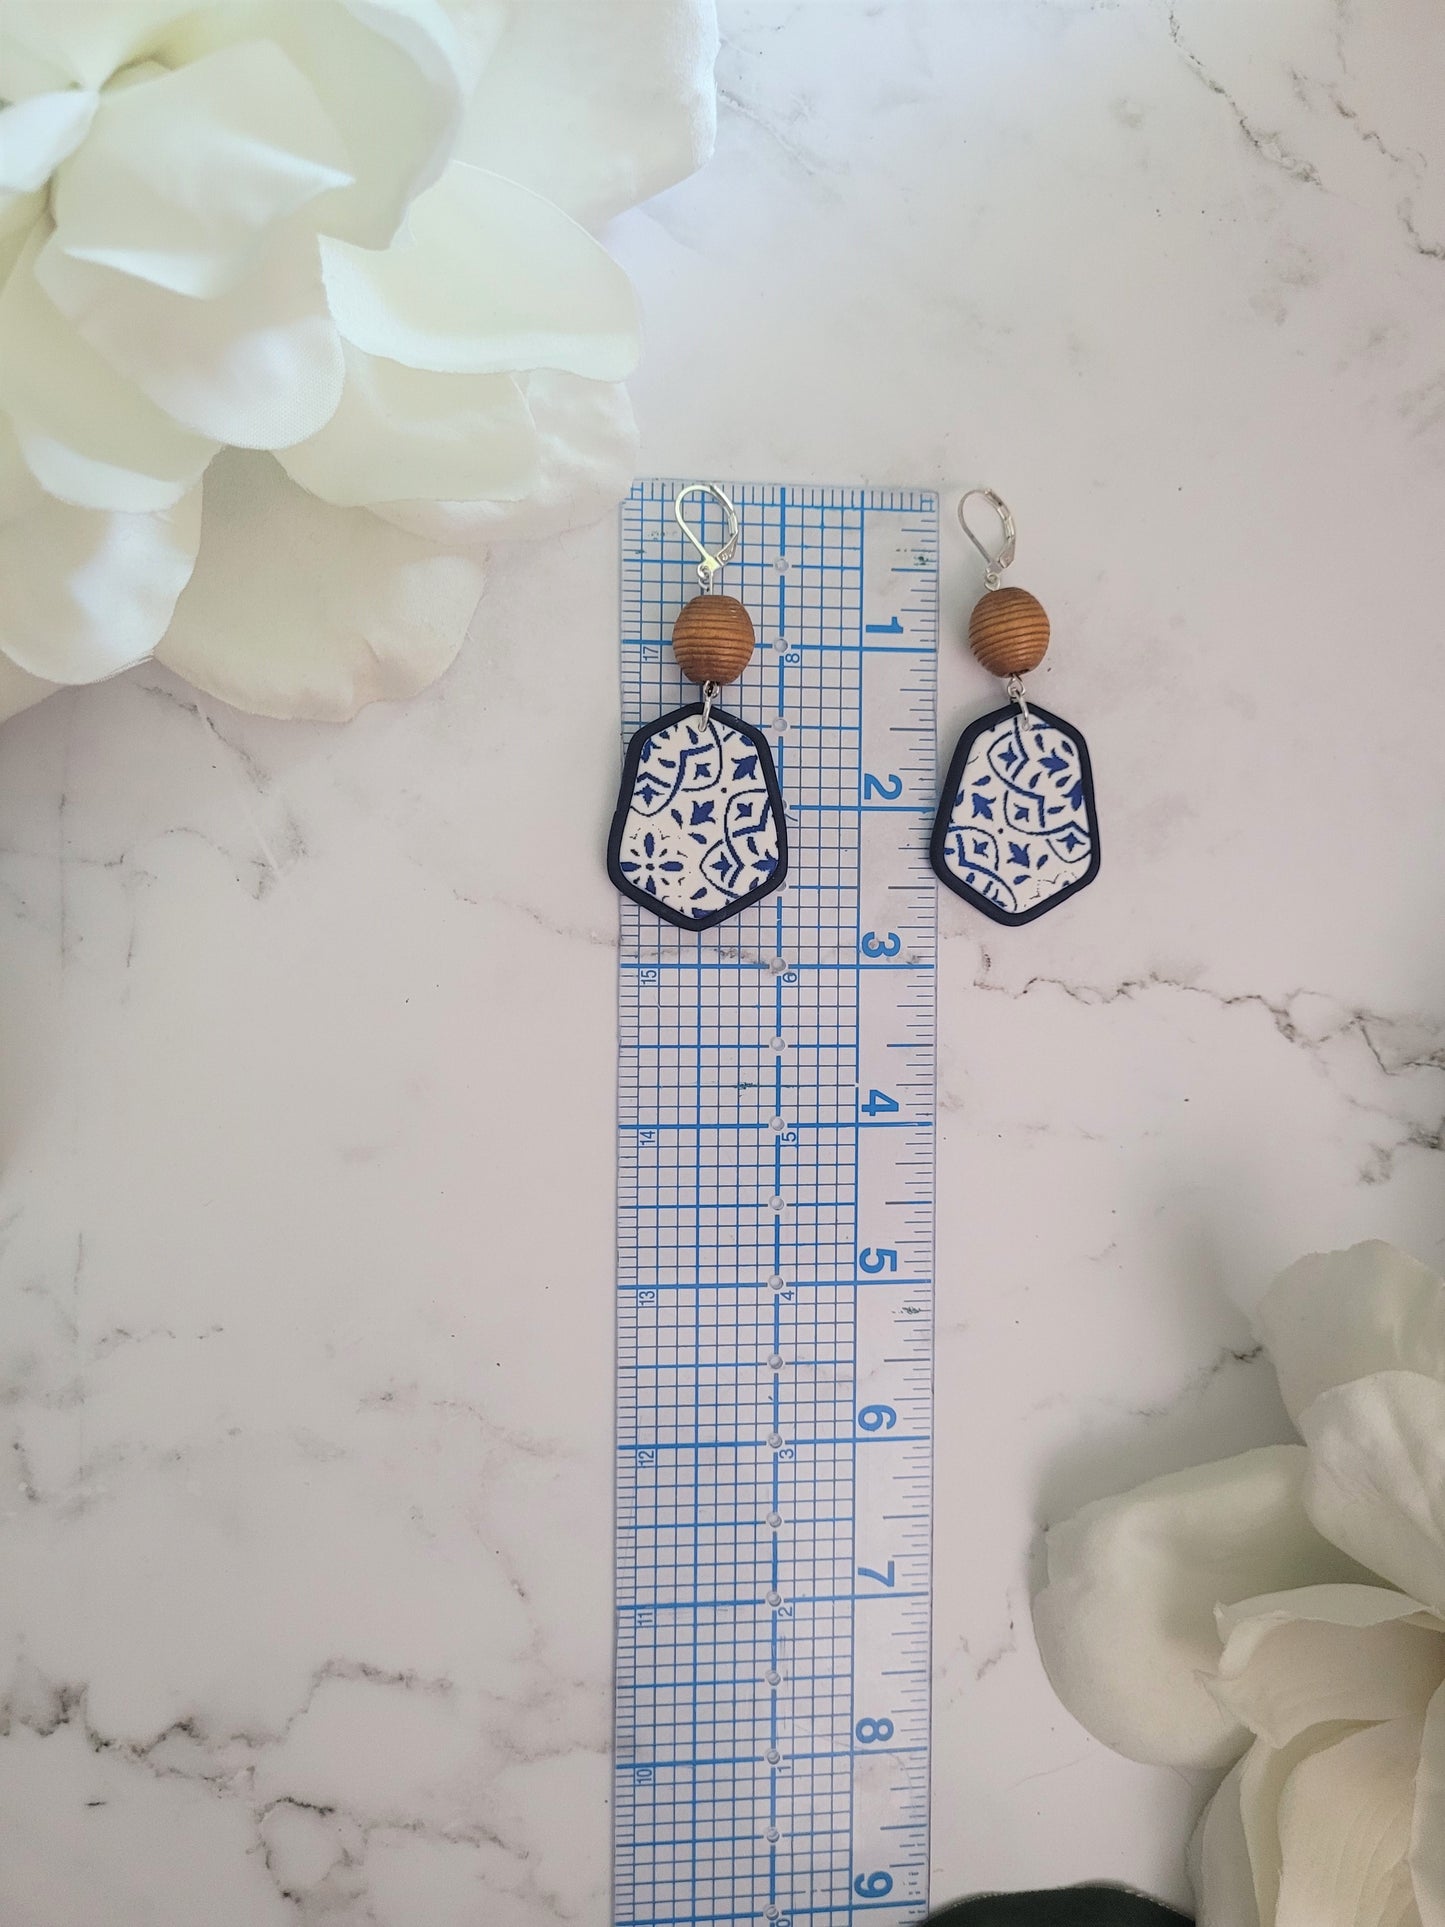 Closeup of Brinn style polymer clay earrings on a white background. Earrings are white and navy with a tile print and wood bead.